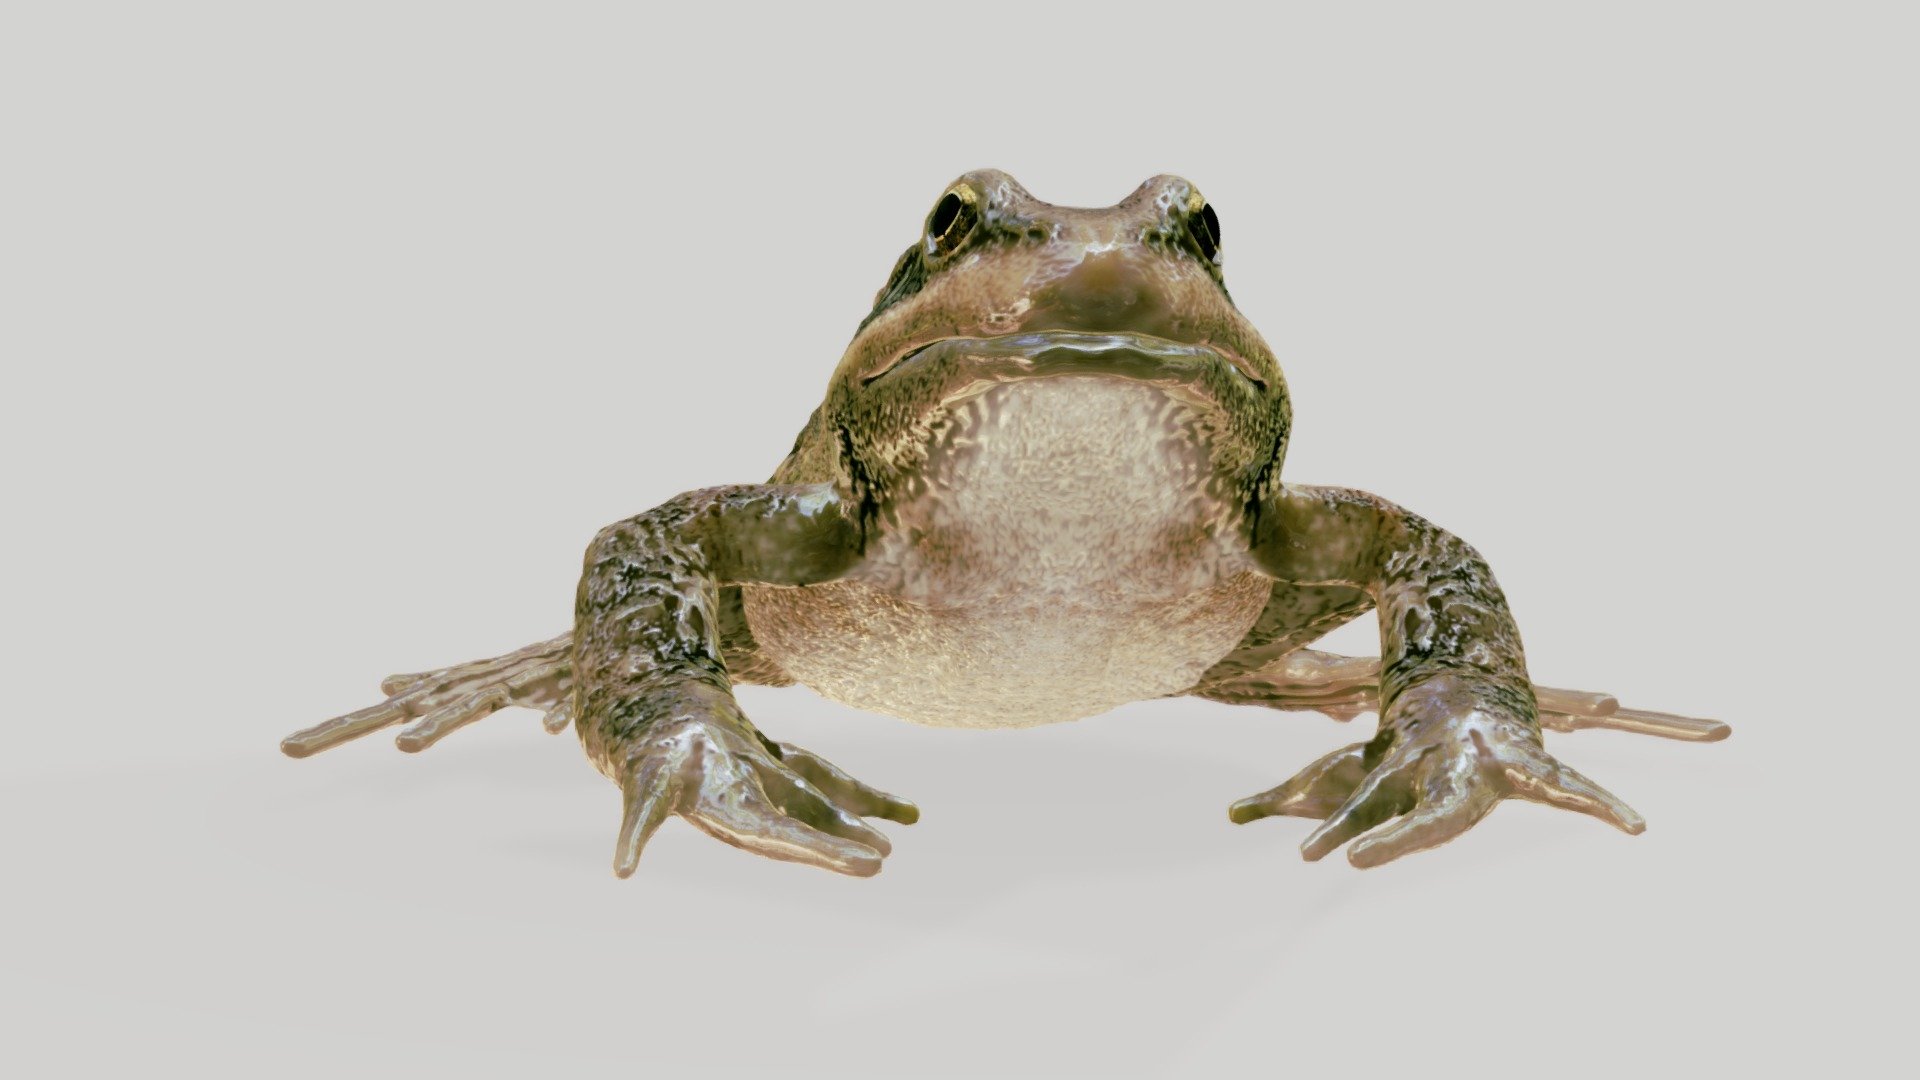 Same frog as here: https://sketchfab.com/models/1016e54d2d3249f28a75aa0b809a15c9 but with some small animated features. Just to see if all animation imports into sketchfab as I intend it to do 3d model